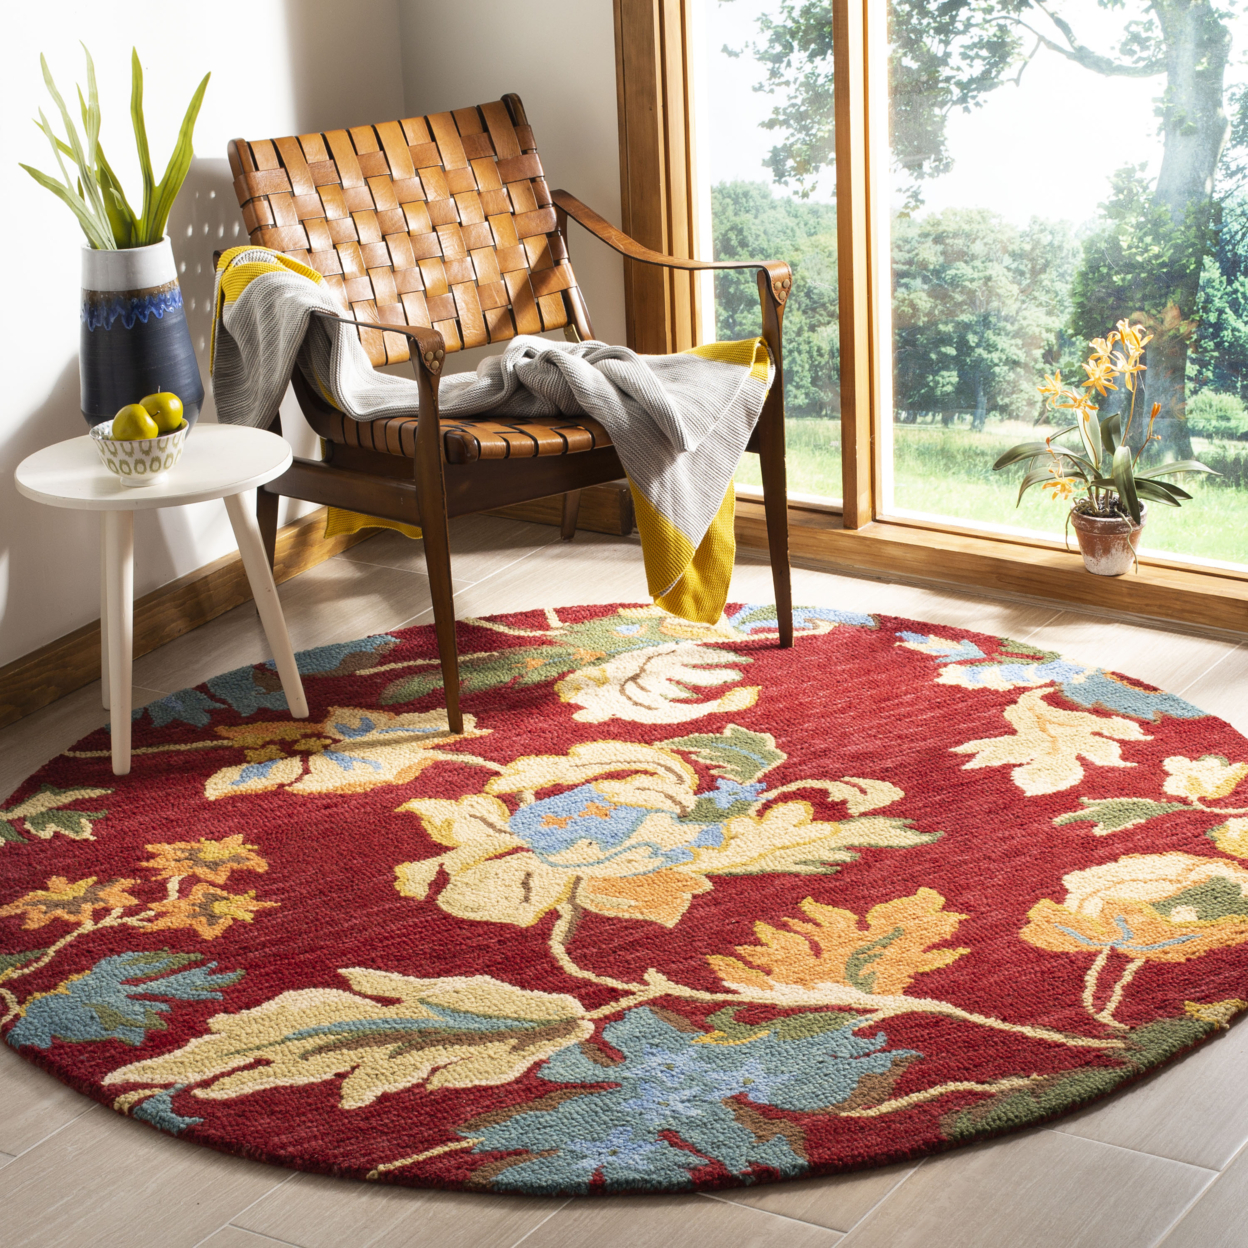 SAFAVIEH Blossom BLM672A Hand-hooked Red / Multi Rug - 6' Round